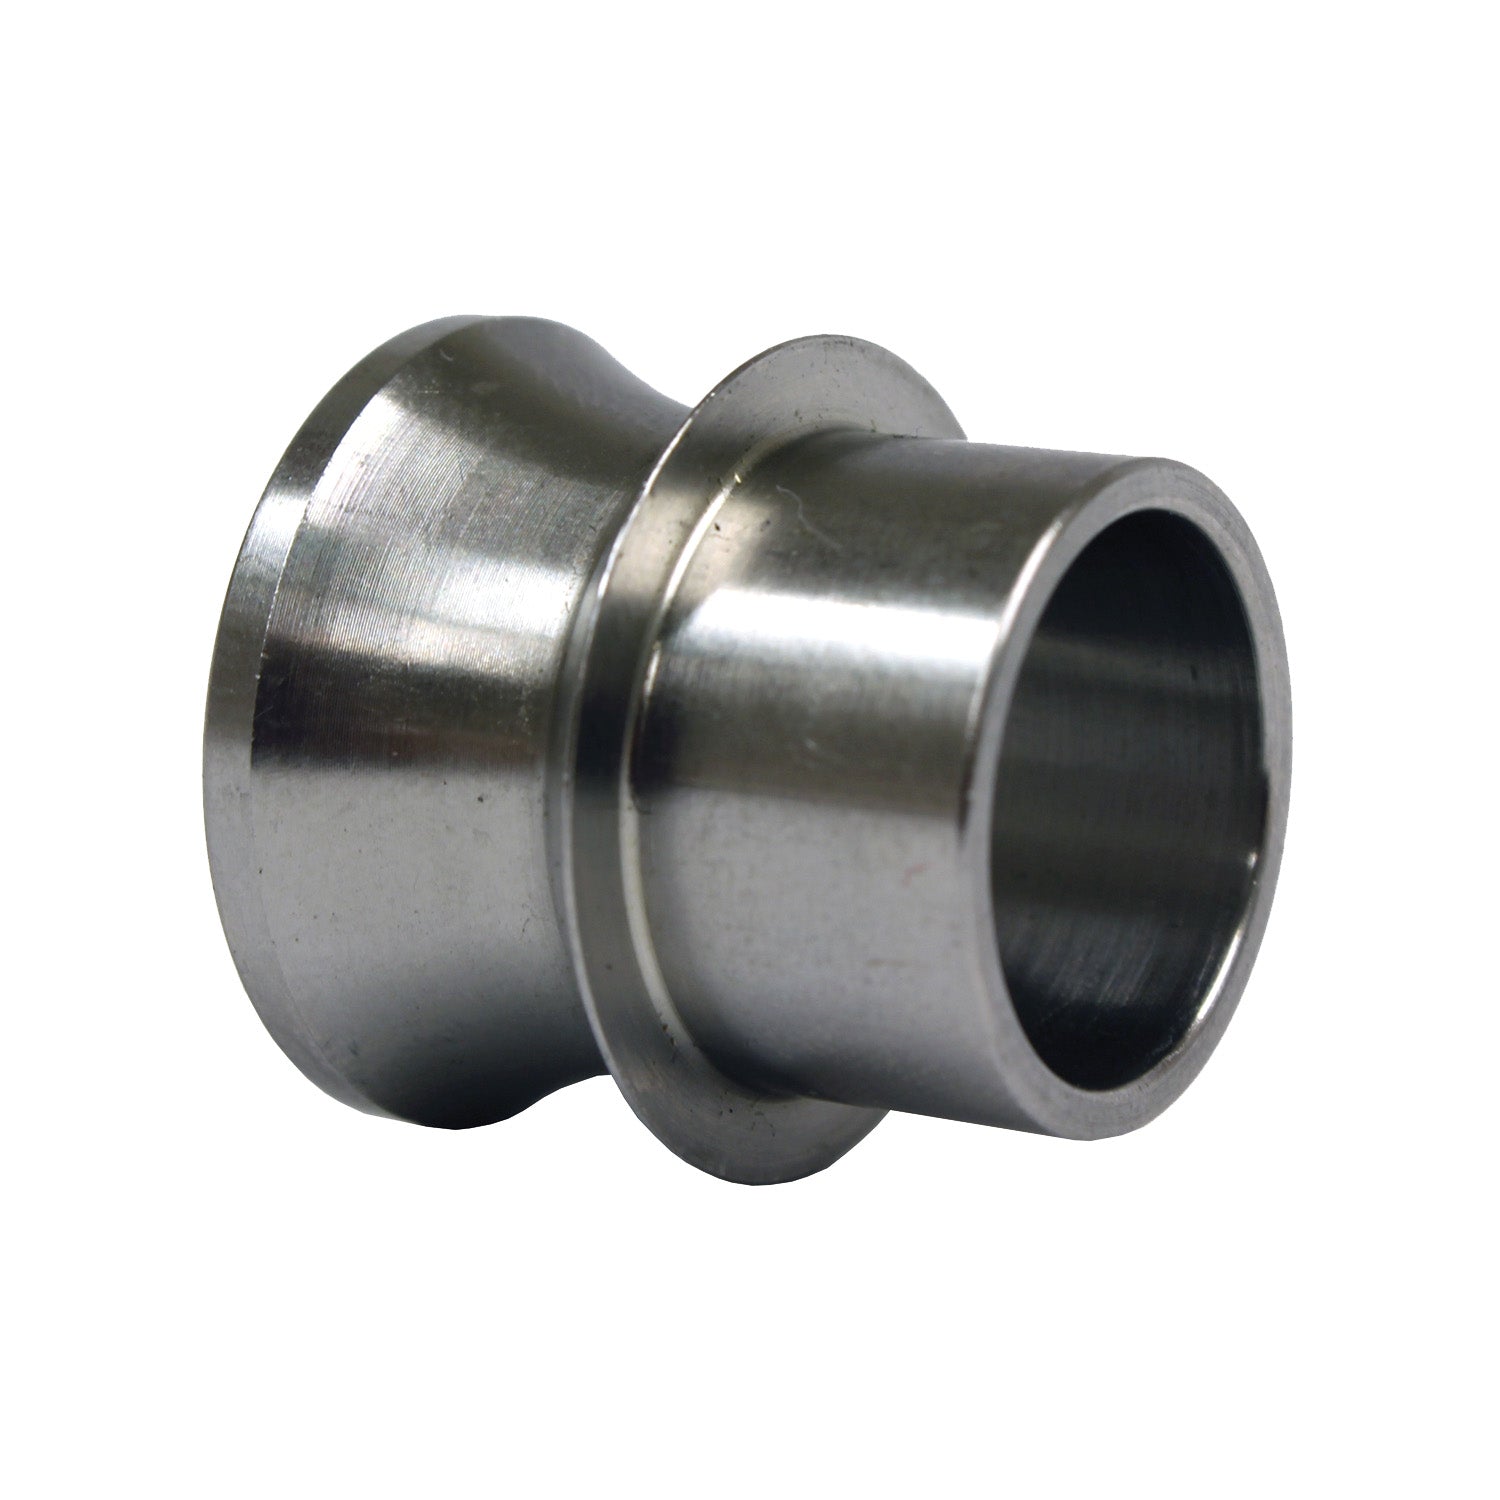 QA1 SN12-107 High Misalignment Spacer, .75 inch Od Ss, .625 inch X 1.625 inch Total Width